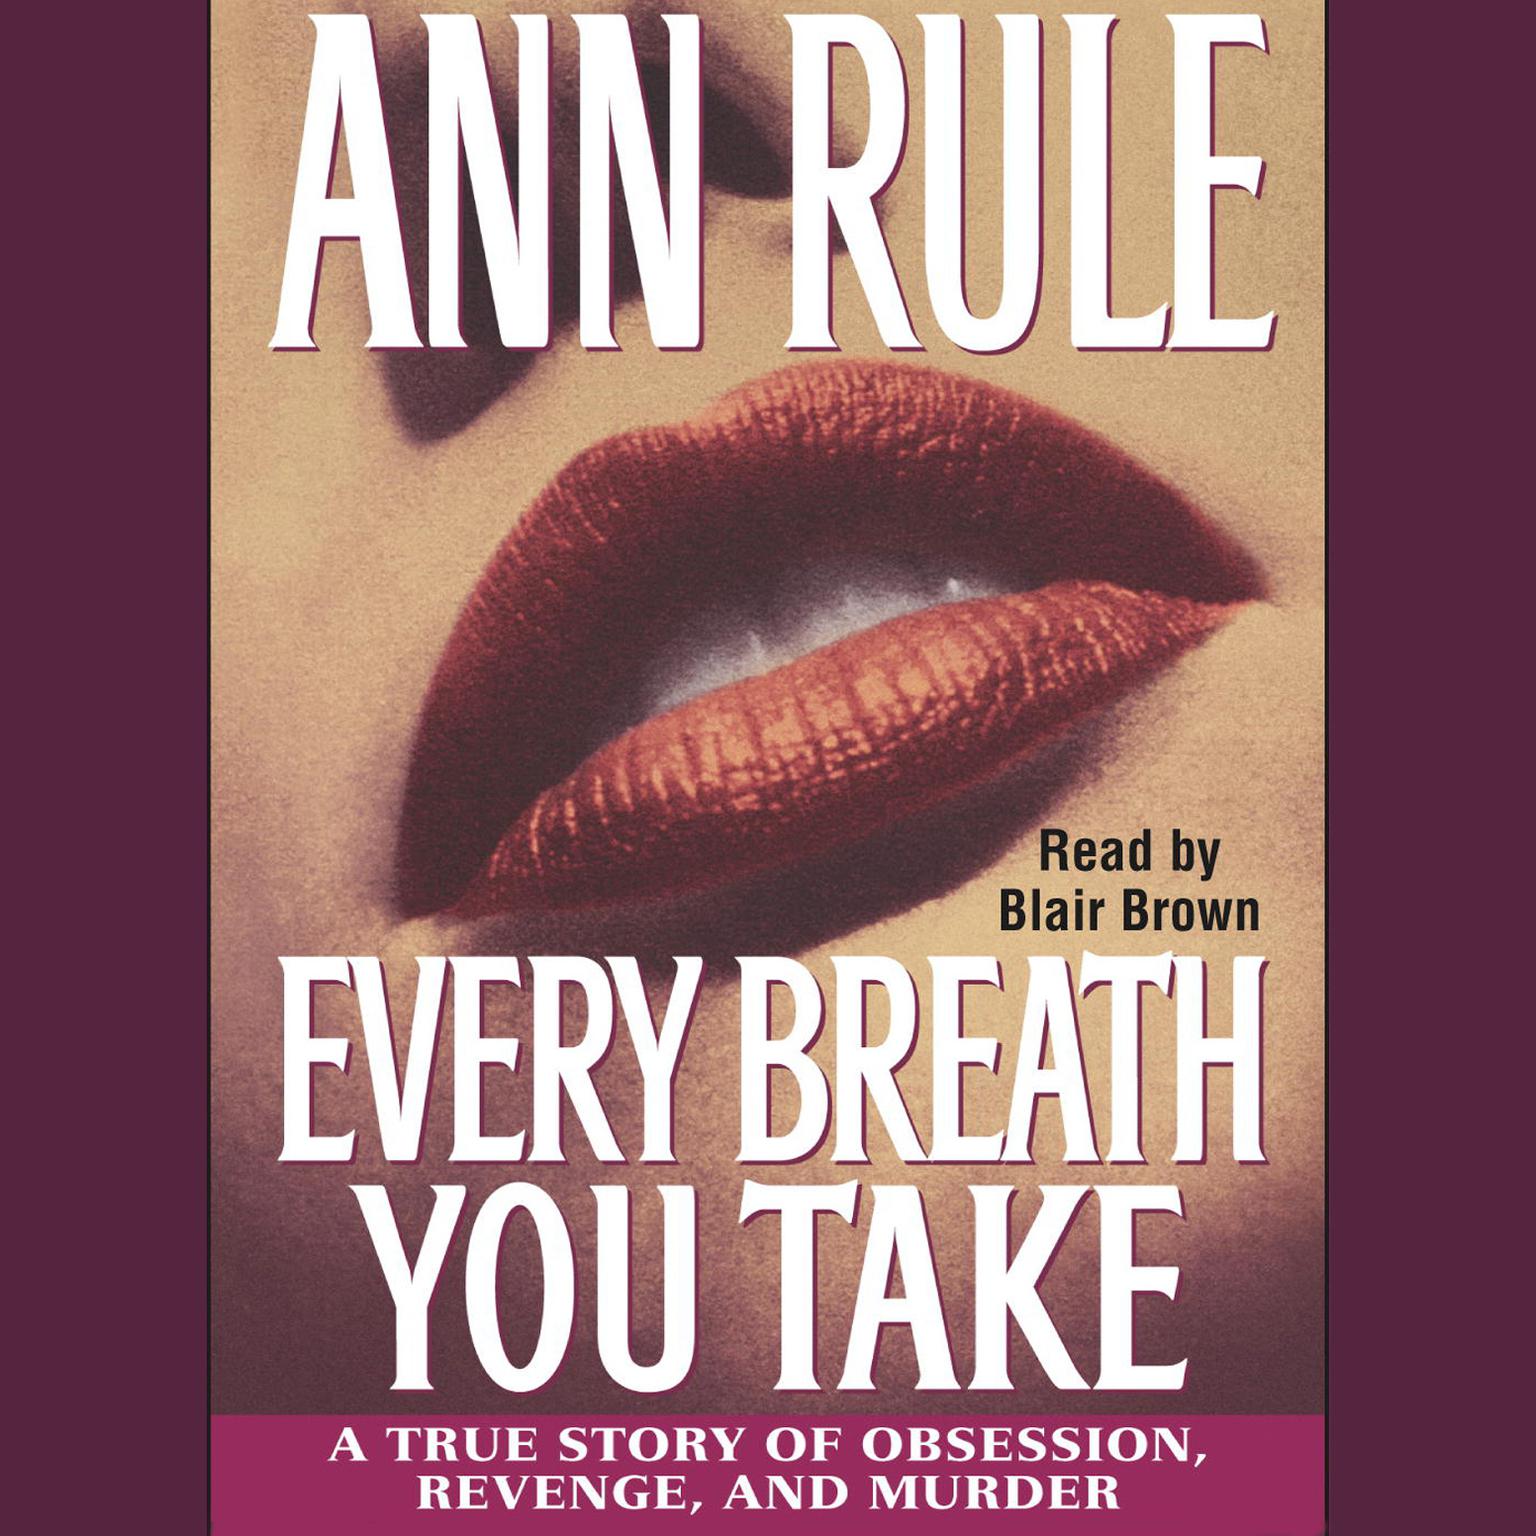 Every Breath You Take (Abridged): A True Story of Obsession, Revenge, and Murder Audiobook, by Ann Rule